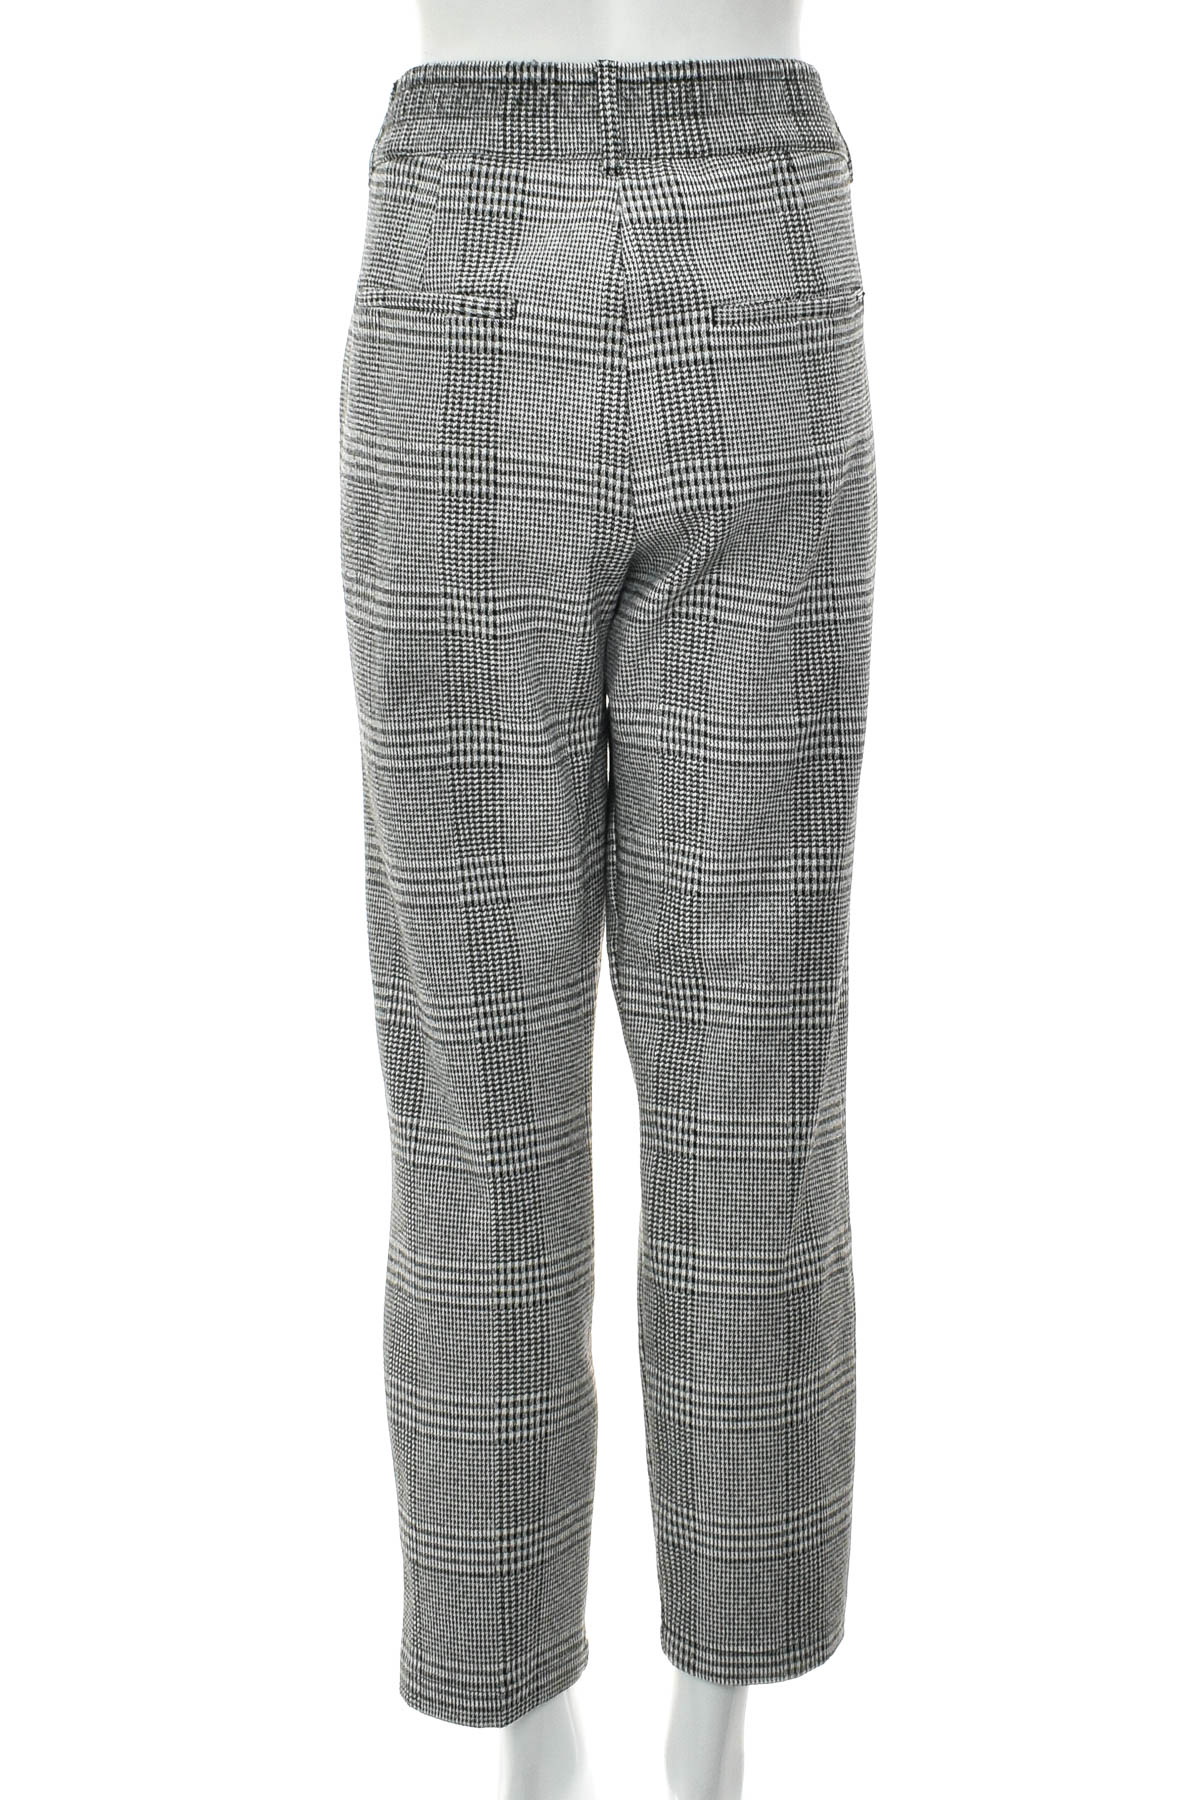 Women's trousers - CECIL - 1